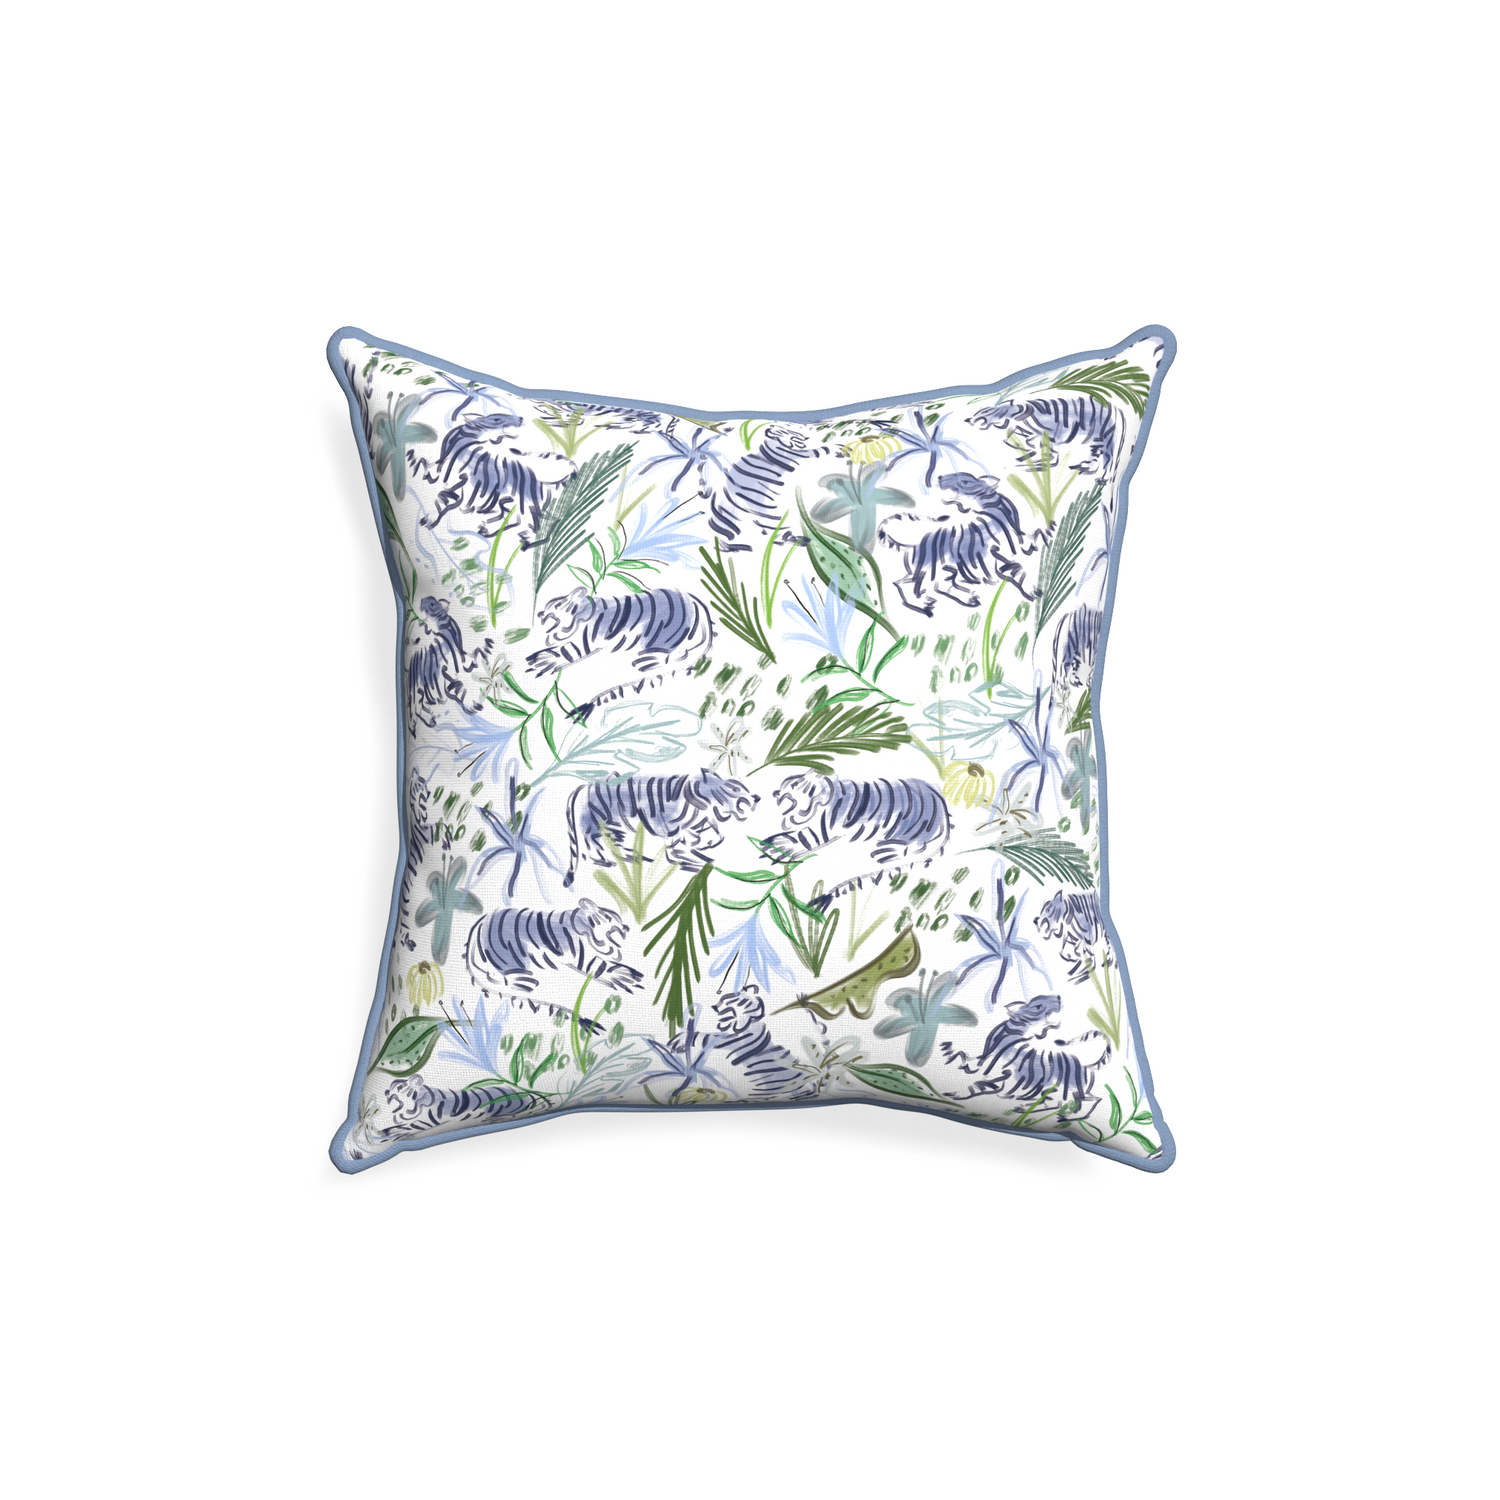 18-square frida green custom pillow with sky piping on white background